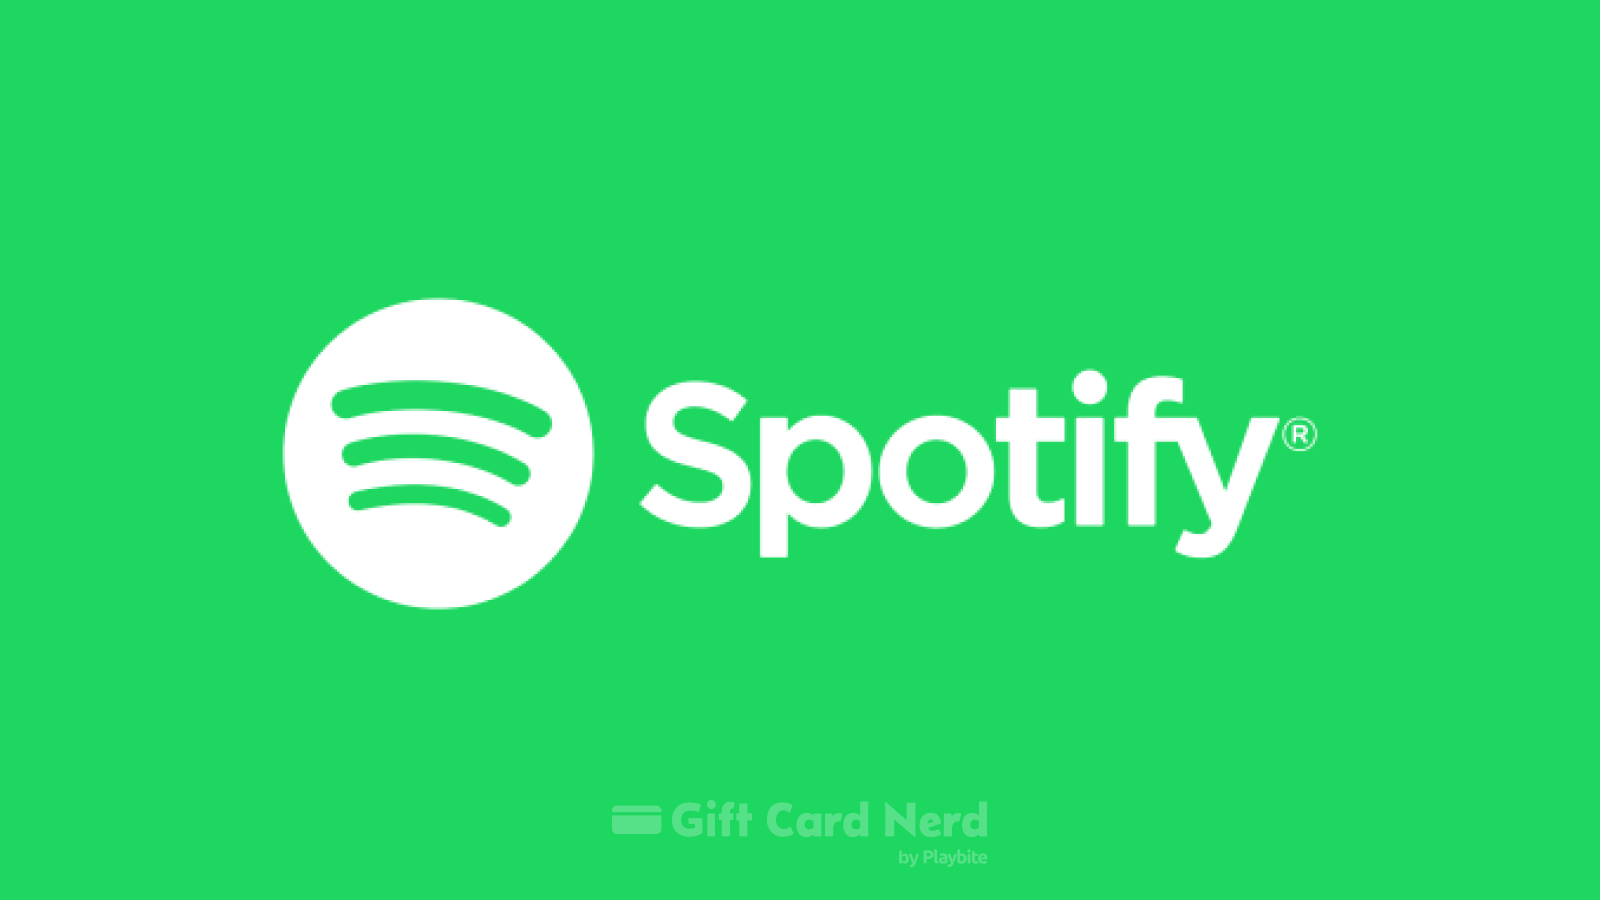 Can I Use a Spotify Gift Card on Grubhub?